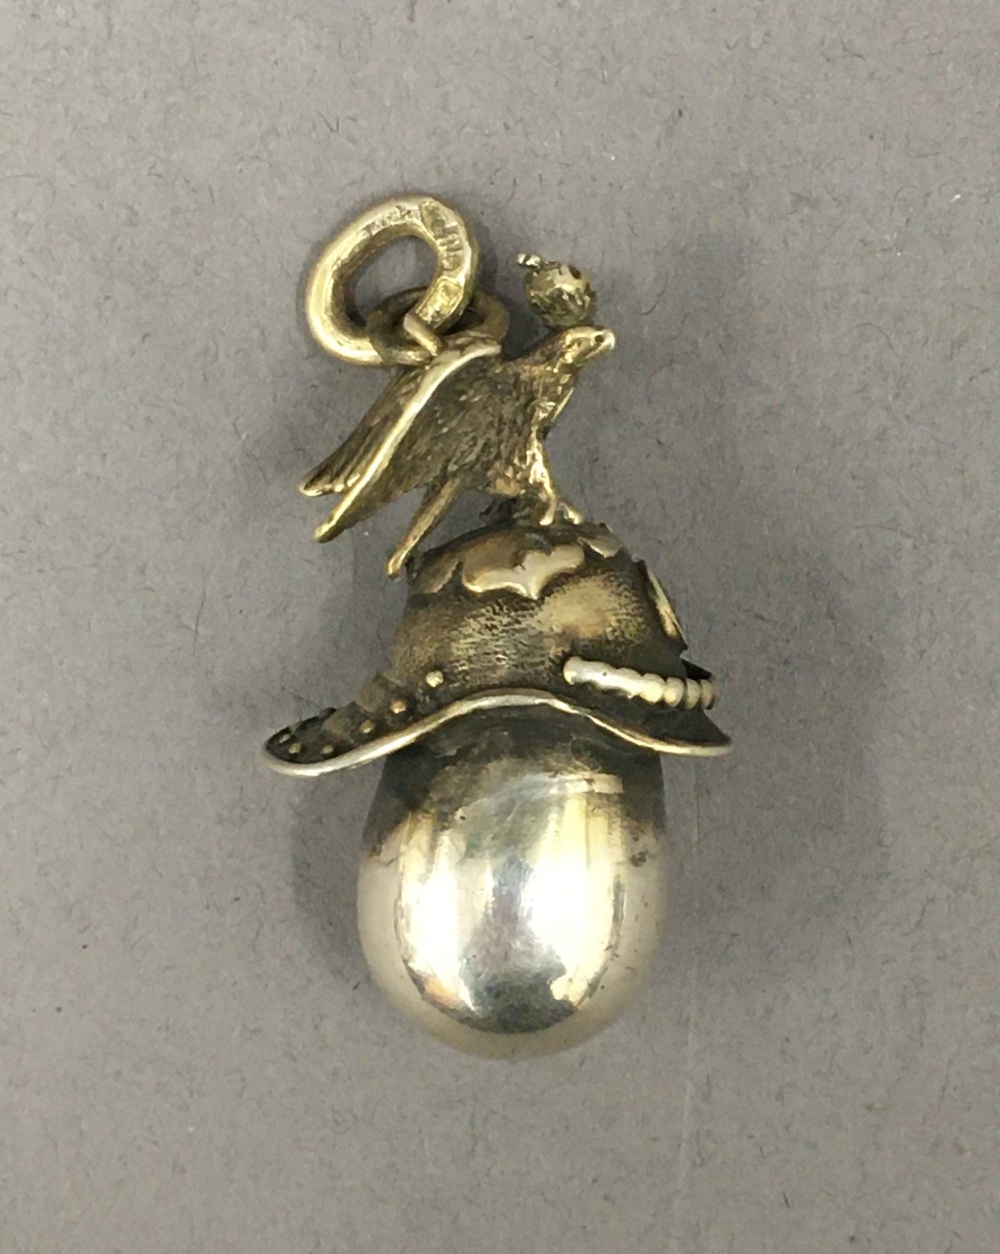 A pendant formed as a Russian helmet and egg. 3.5 cm high.